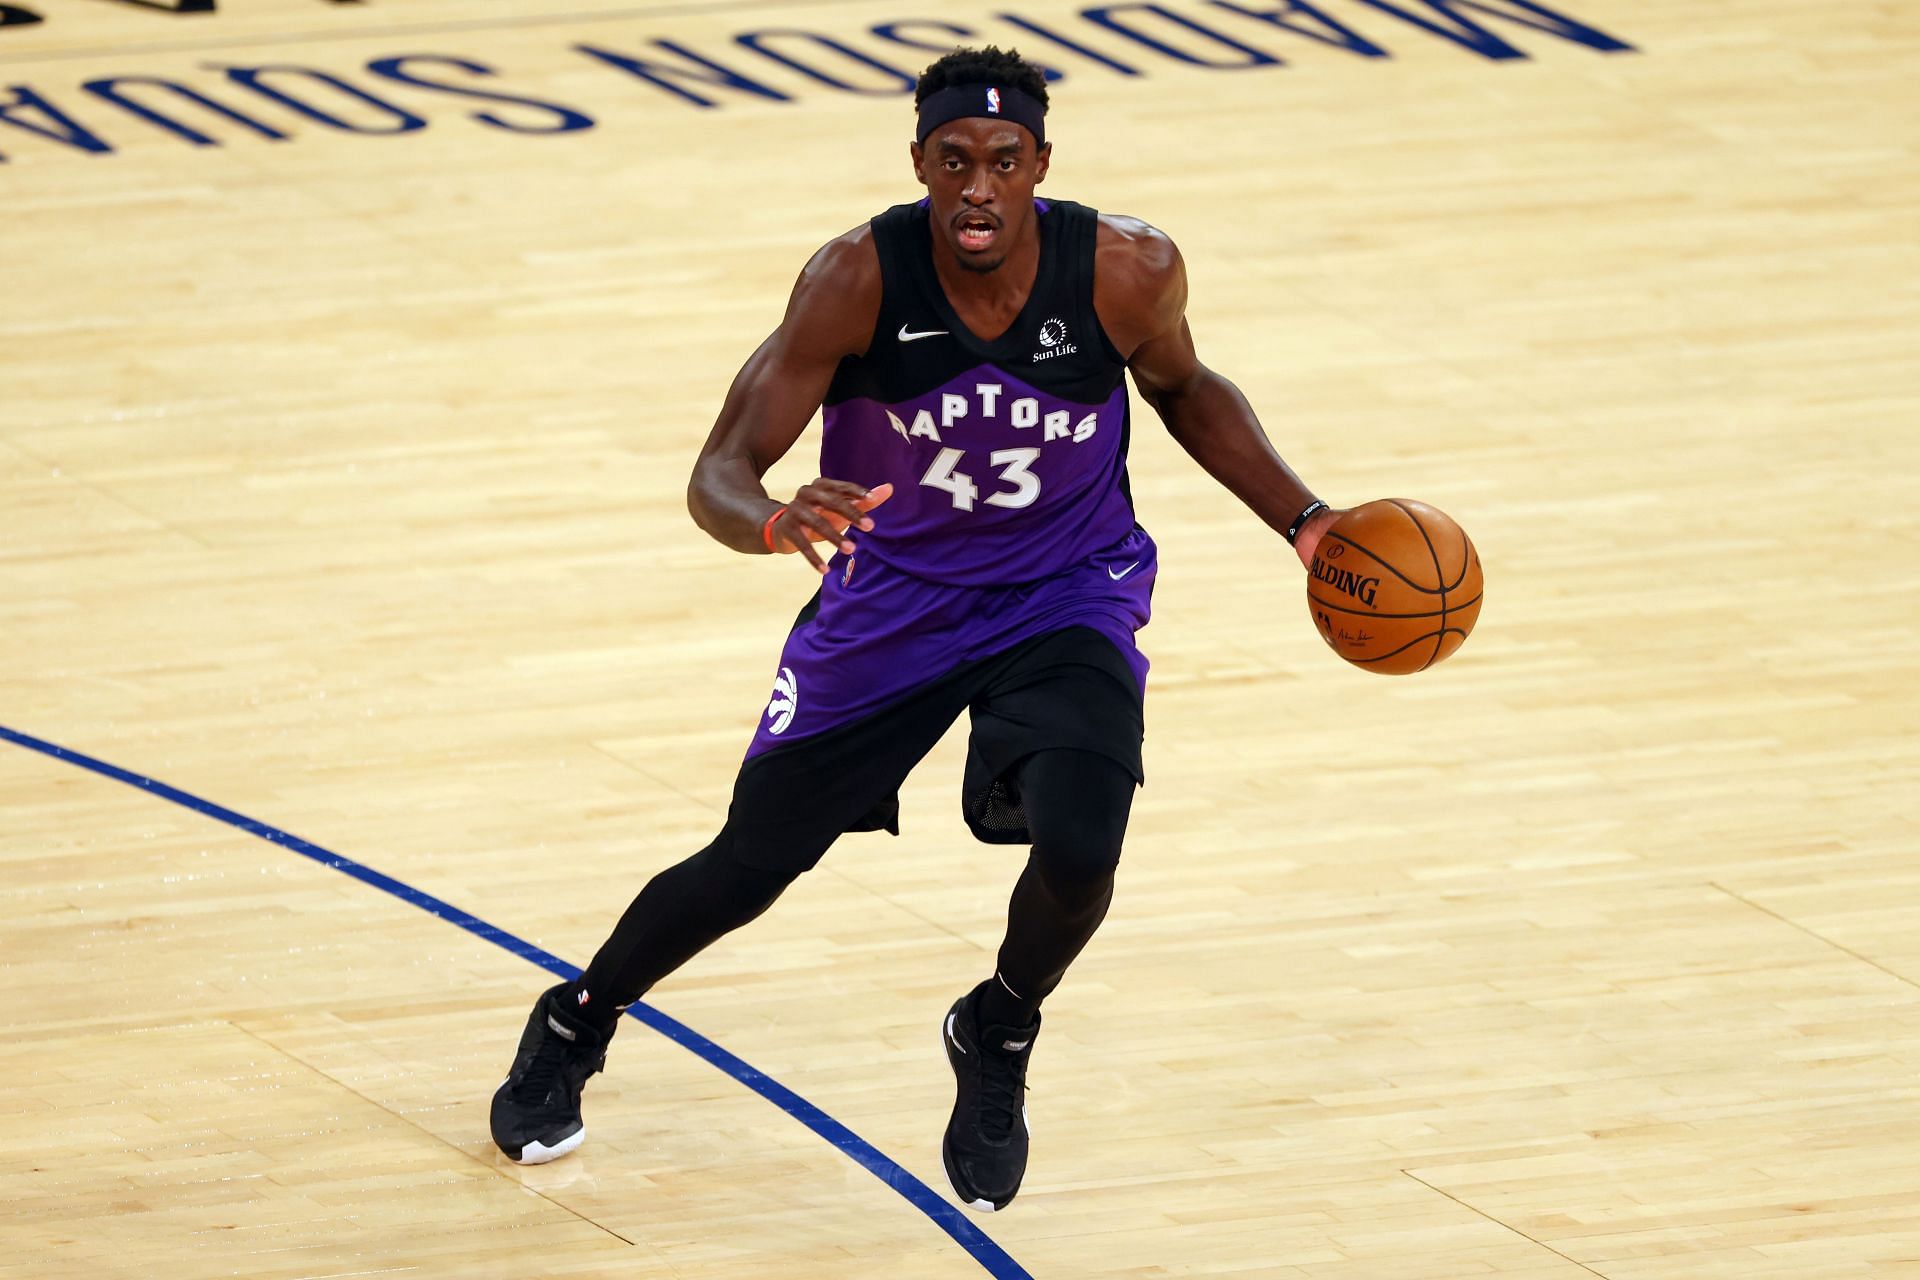 Pascal Siakam emerged as a superstar caliber player for the Toronto Raptors